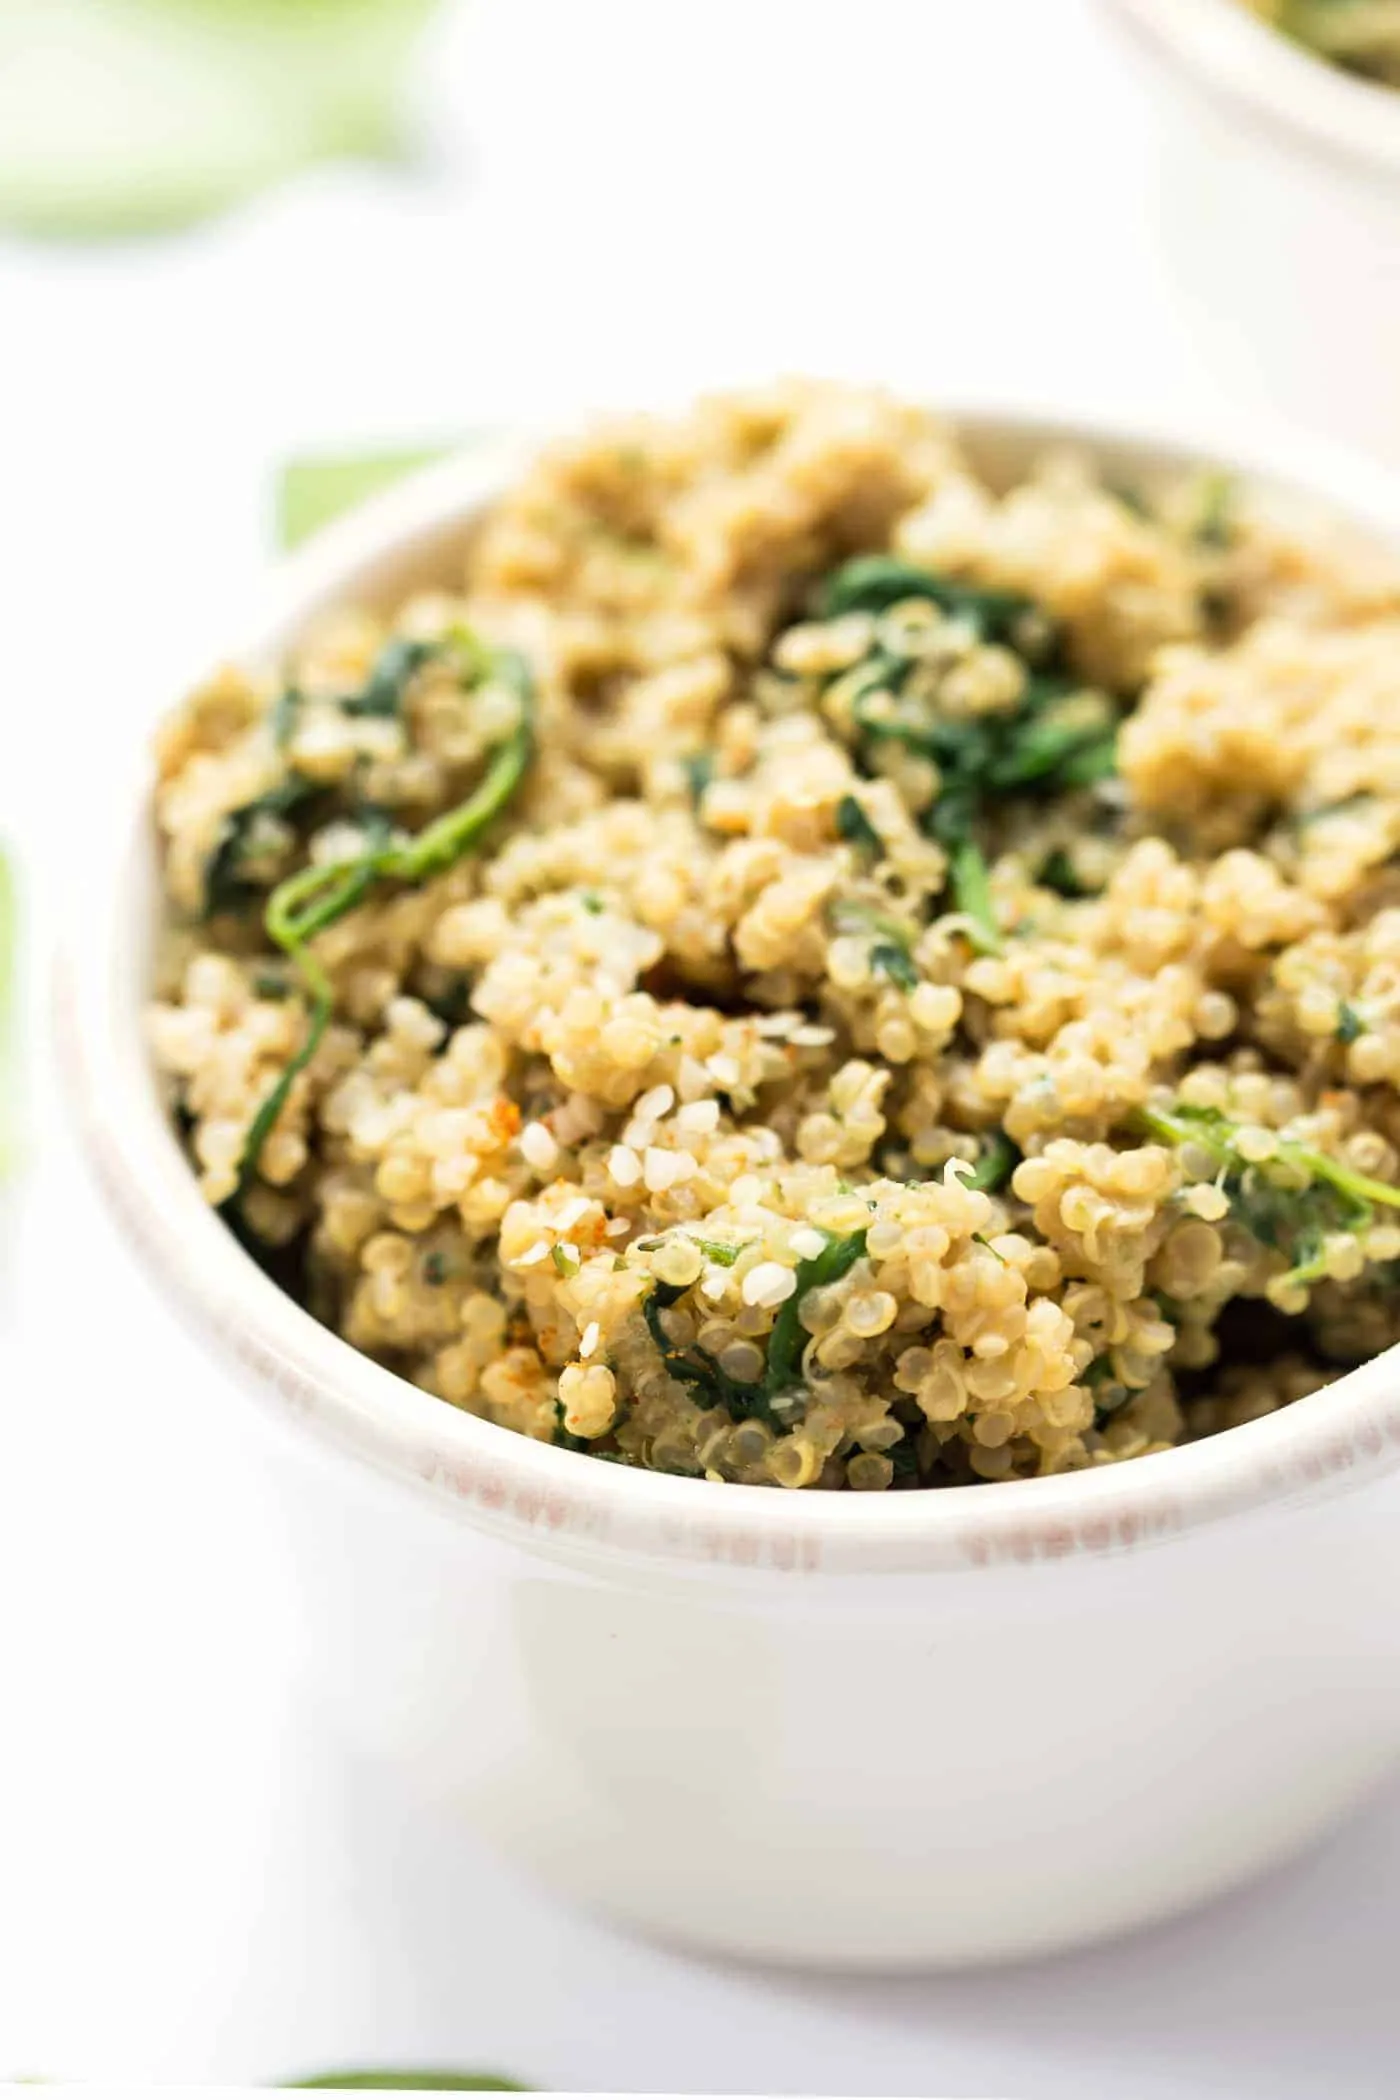 Creamy Quinoa Mac and Cheese with spinach! Made in just ONE POT and comes together in less than 15 minutes!